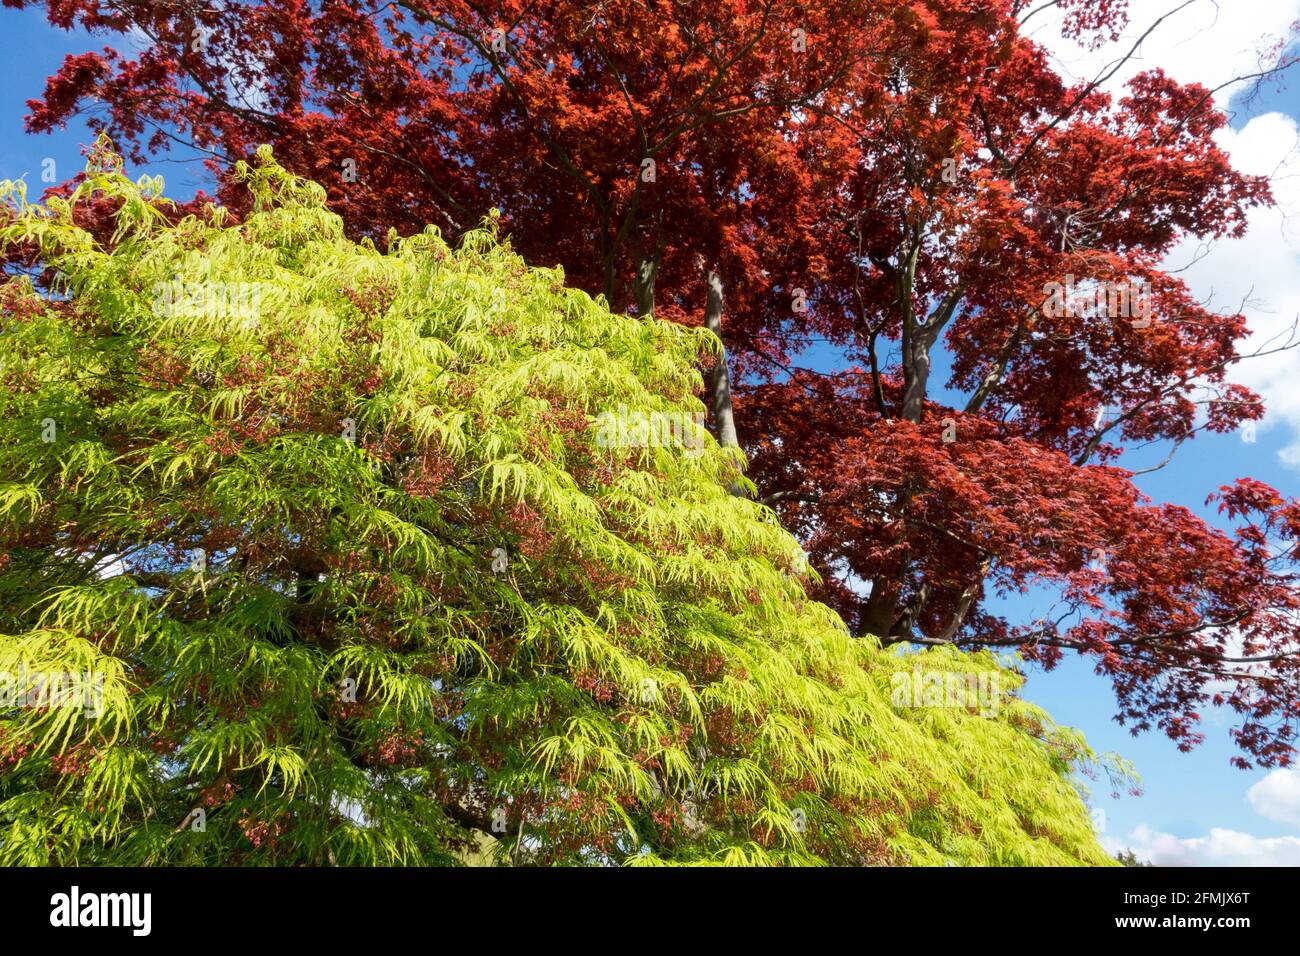 Acer palmatum 'Dissectum Viridis' Weeping Japanese Maple Bright Green Red Acer palmatum tree Cultivar 'Fireglow' Maples Trees Growing in Garden Spring Stock Photo